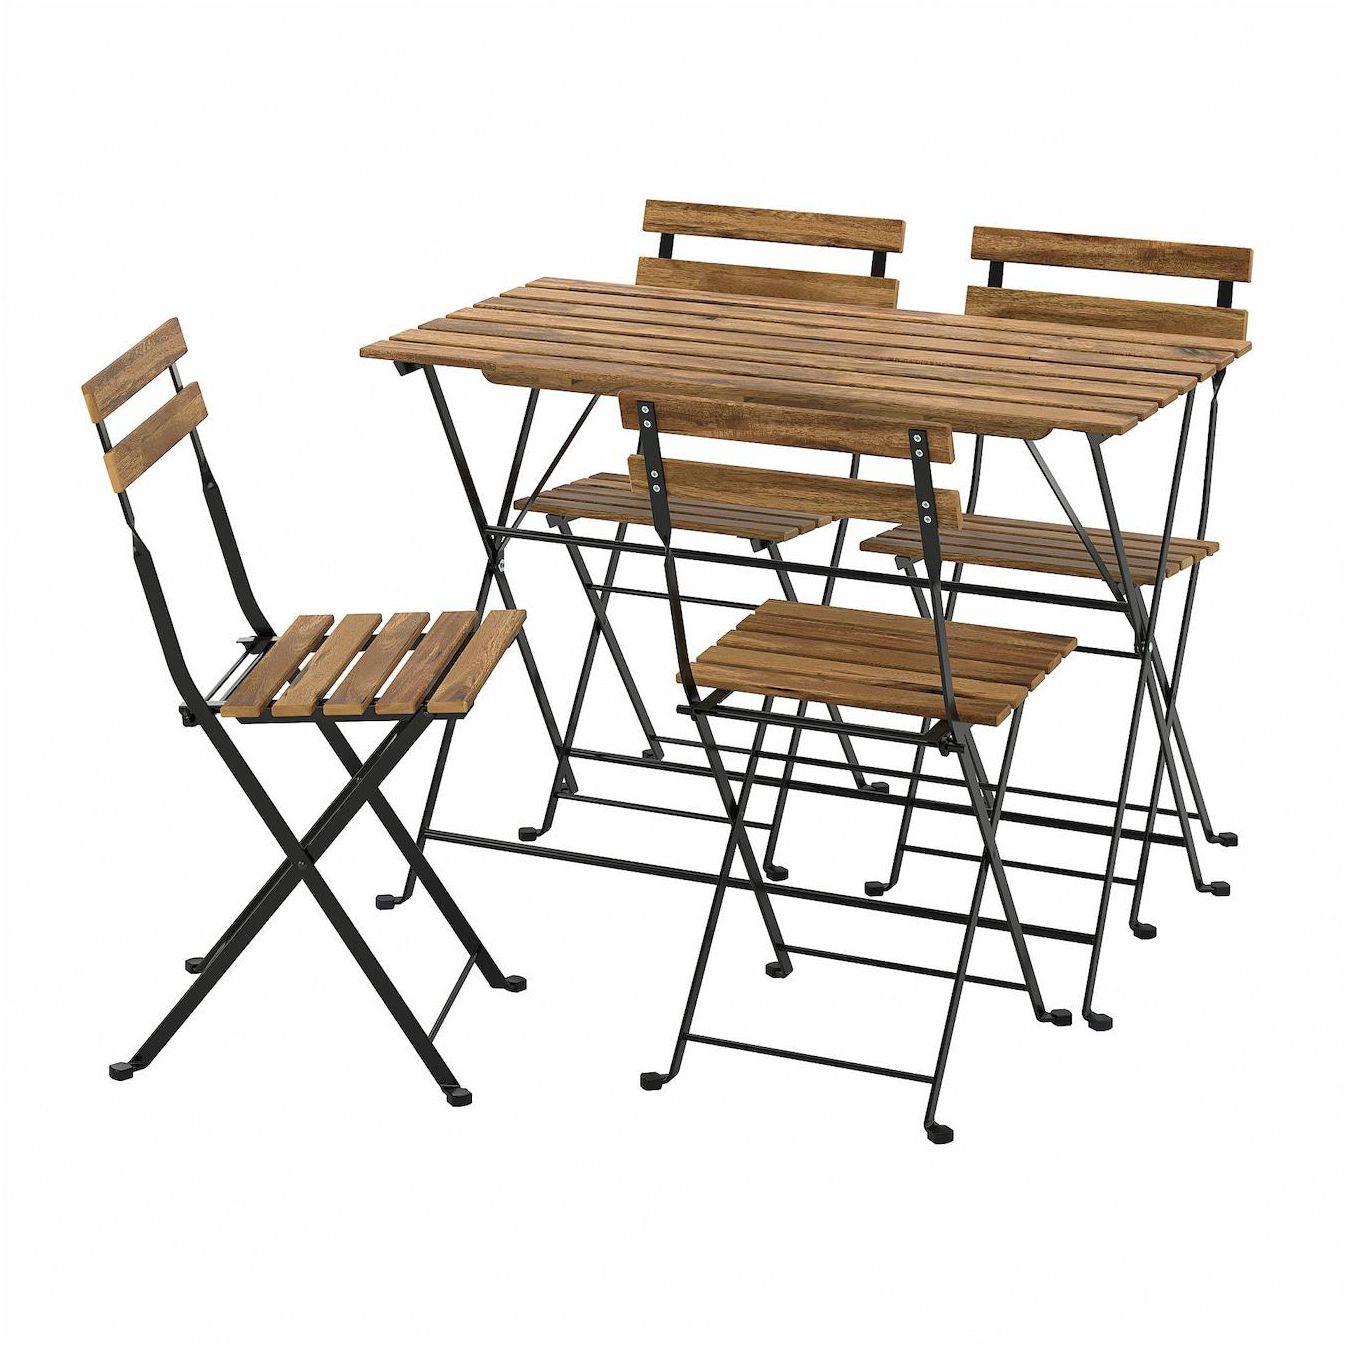 TÄRNÖ Table+4 chairs, outdoor - black/light brown stained